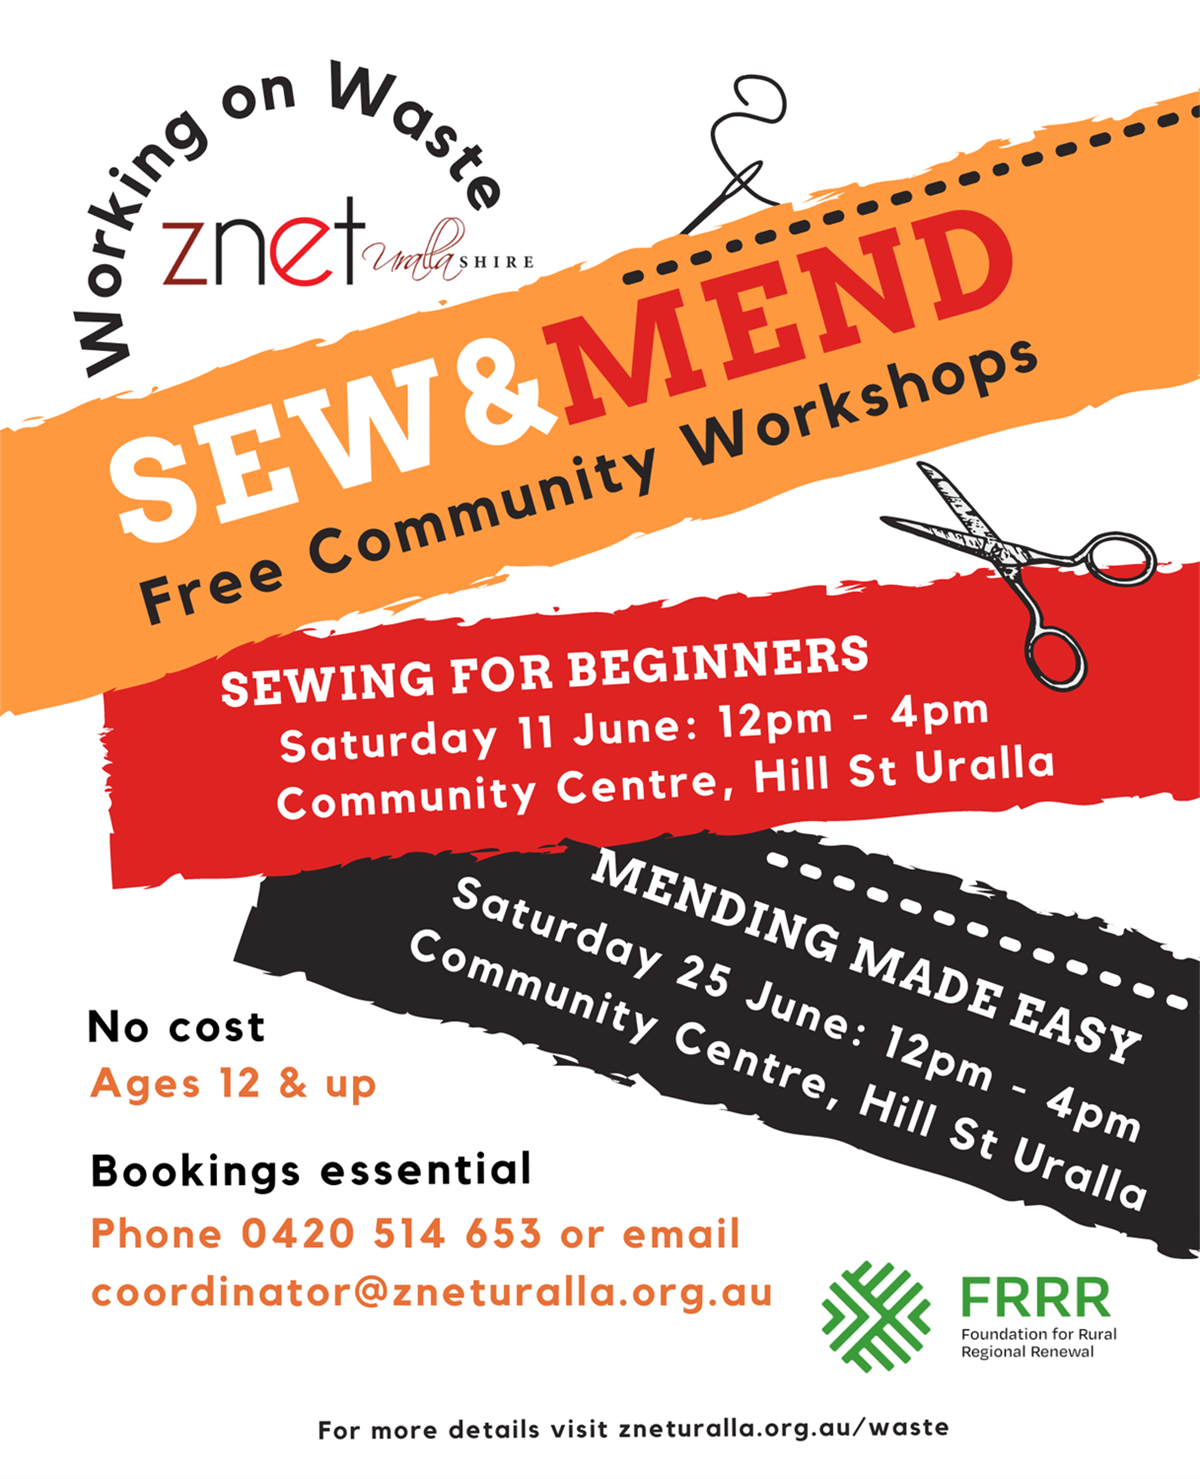 znet-sew-mend-workshops-mending-made-easy-uralla-shire-council